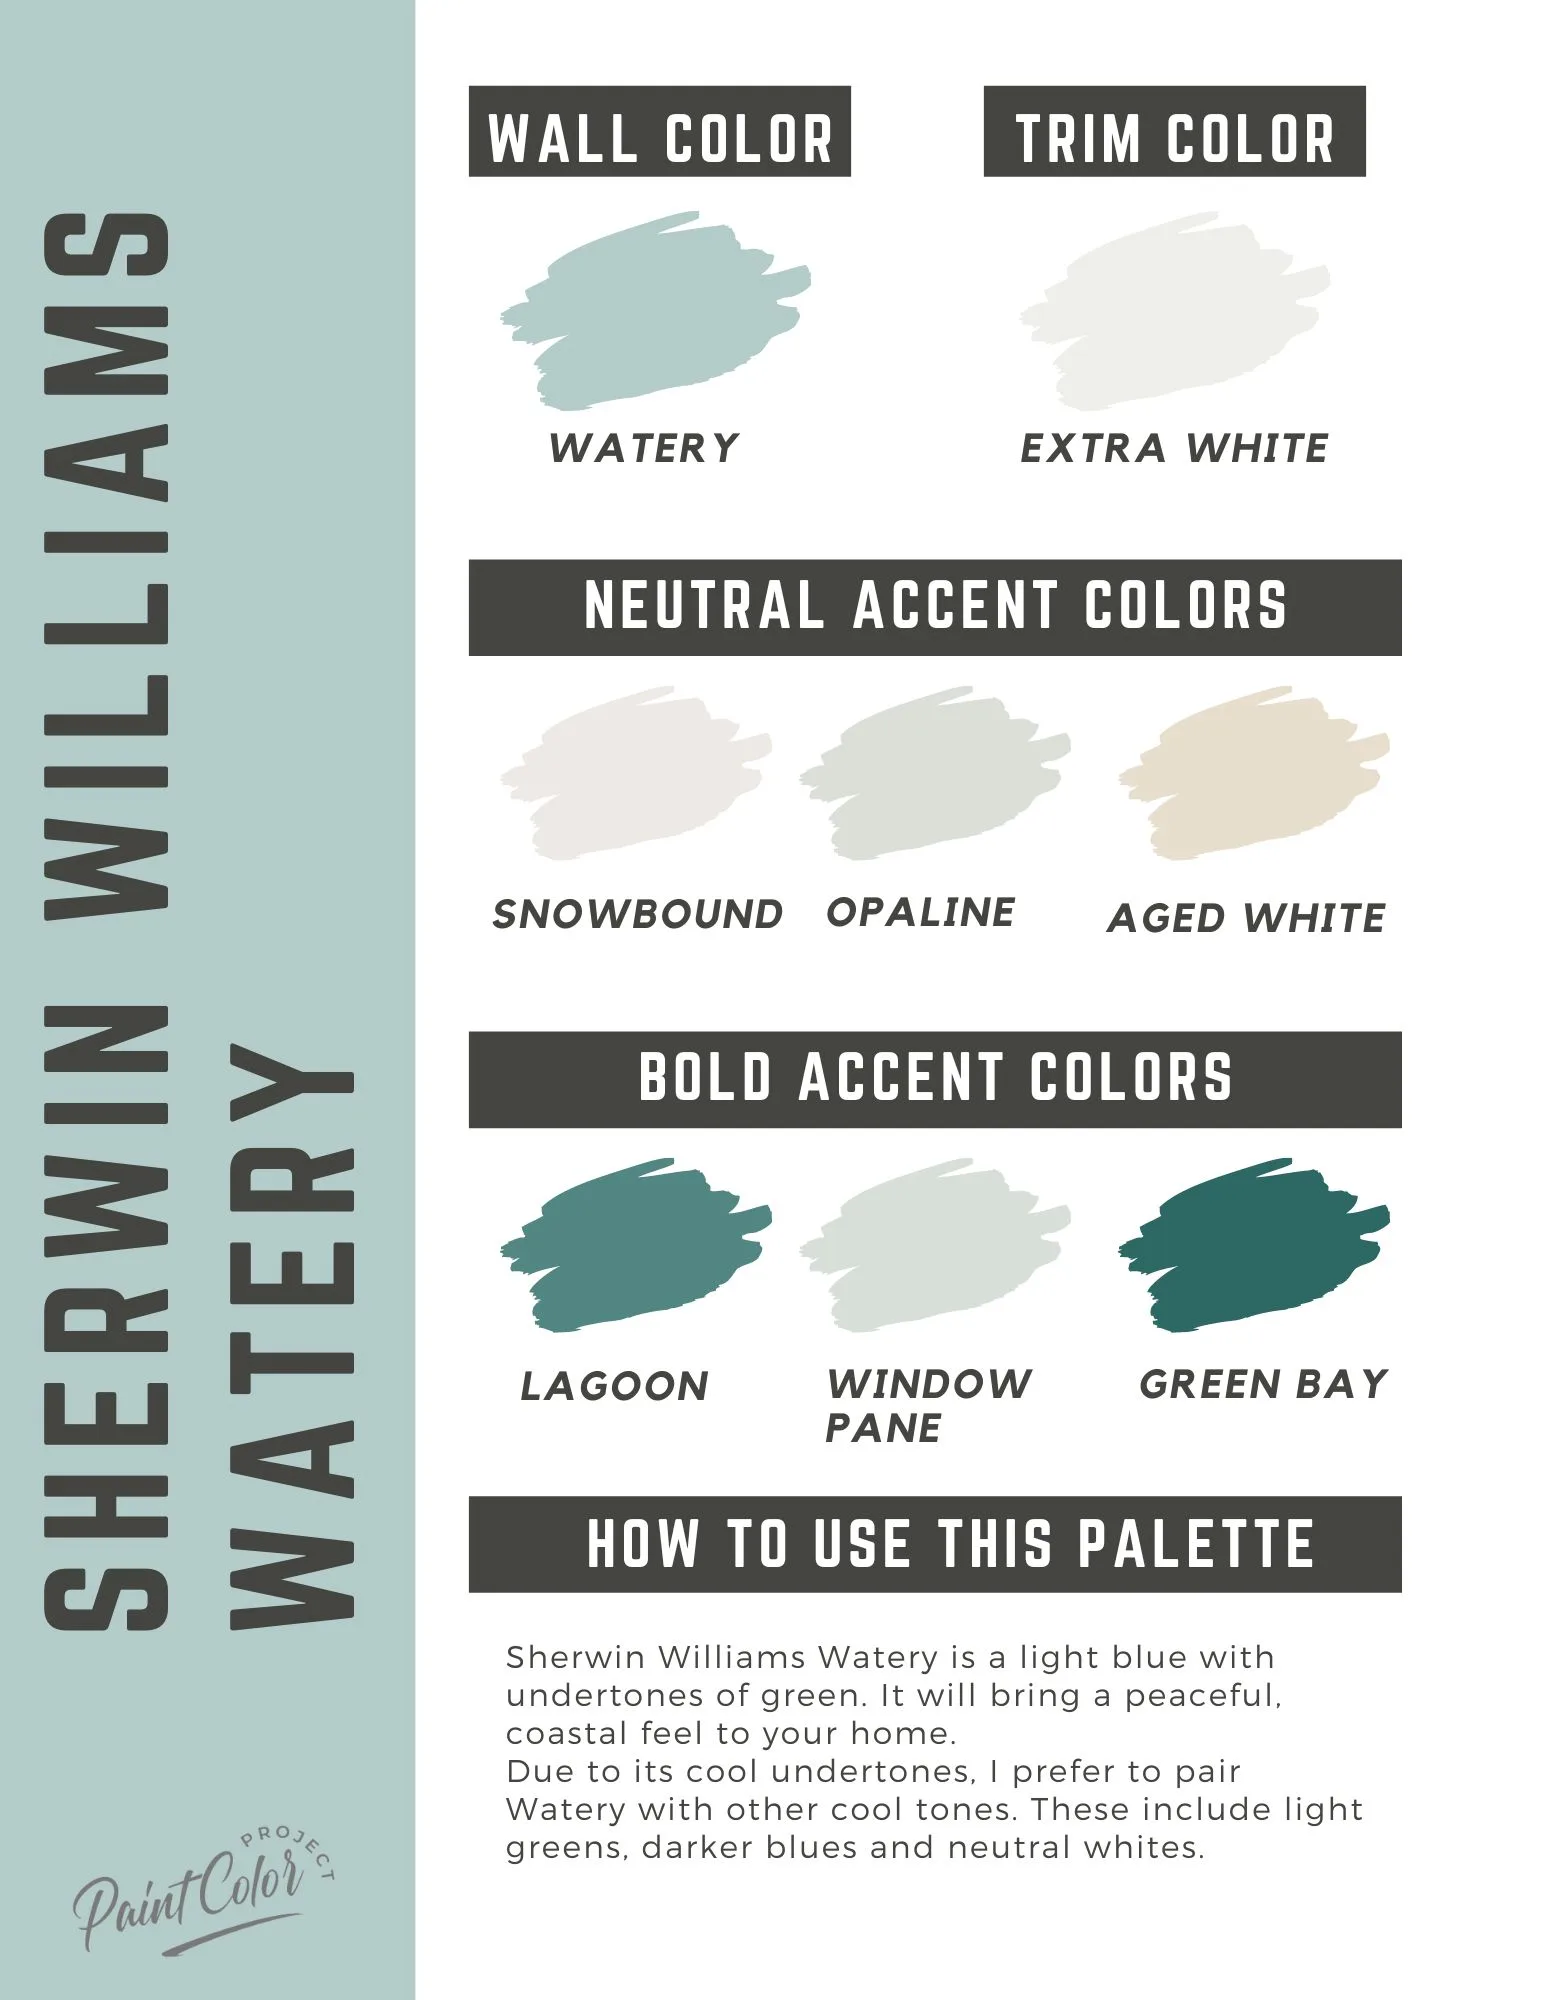 Sherwin Williams Watery paint color palette